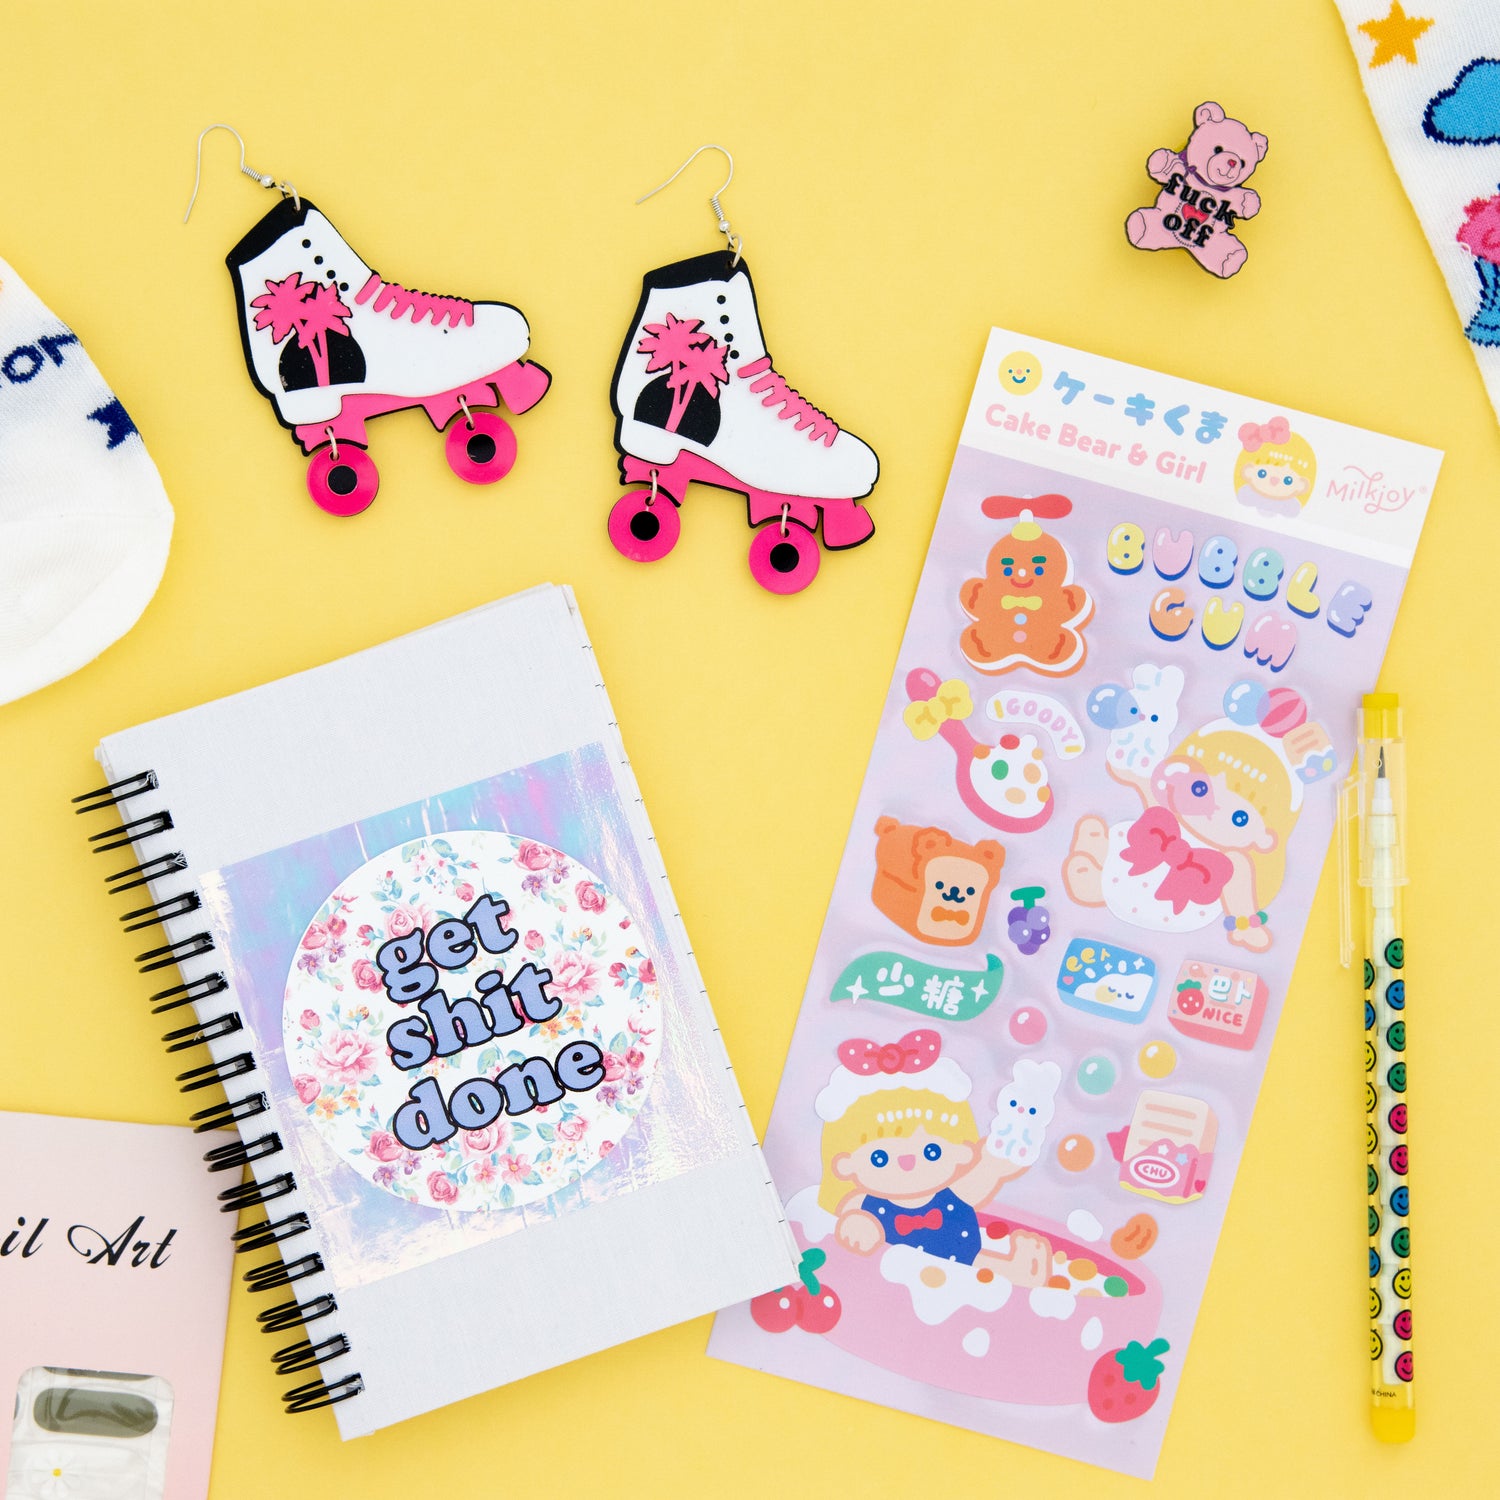 Funky roller skate earrings, enamel pin with a teddy bear saying 'Fuck Off,' bubble gum cake bear girl stickers, yellow smiley face pop a point pencil, and 'Get Shit Done' notebook with holographic sticker and flower background, perfect for fans of retro and quirky accessories from The Oddball Club.